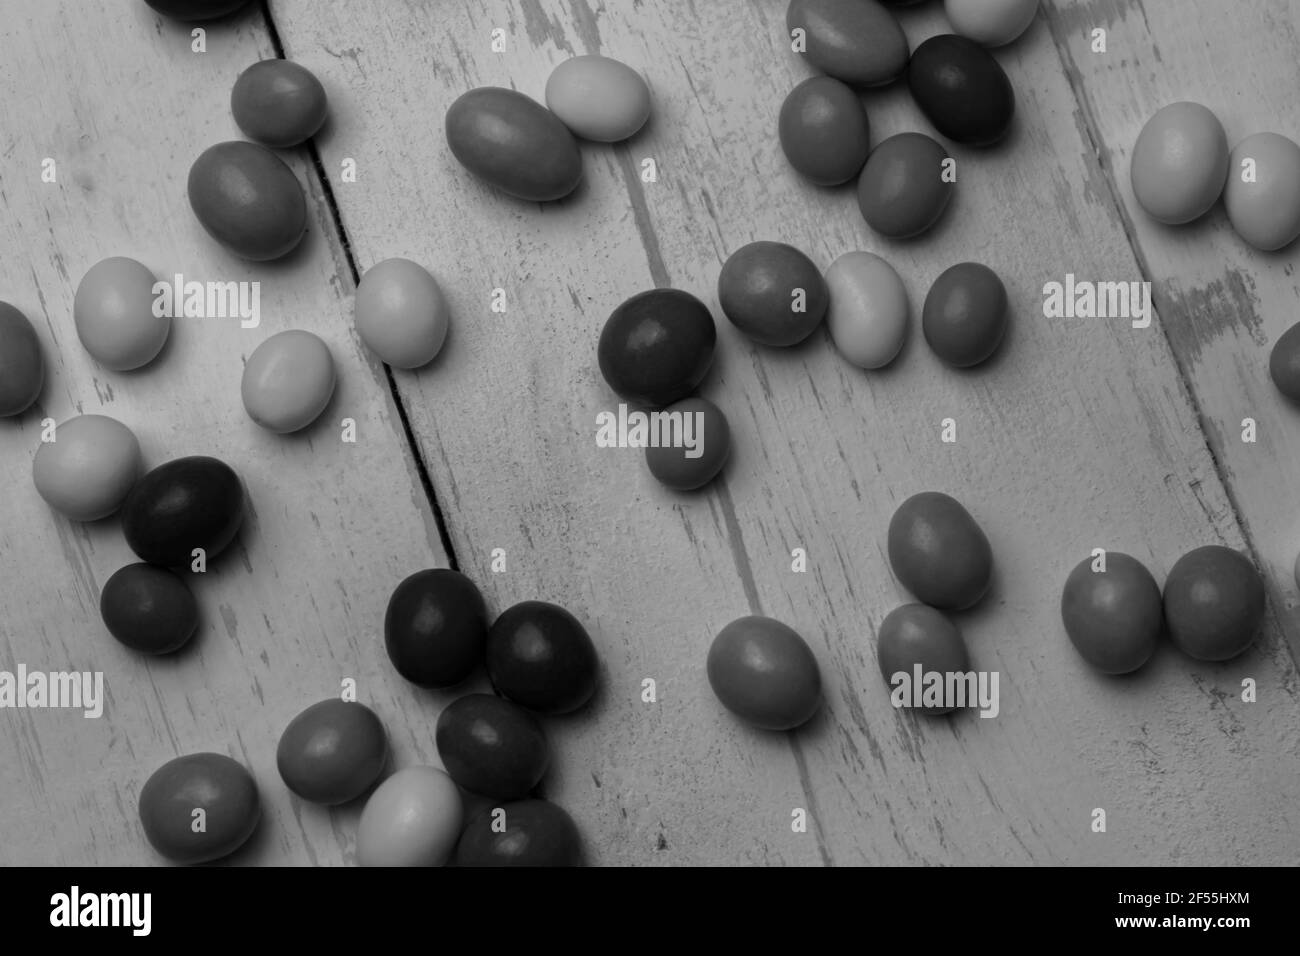 Top view of chocolate balls background.Black and white creative photography style ,sweets and candies background. Stock Photo